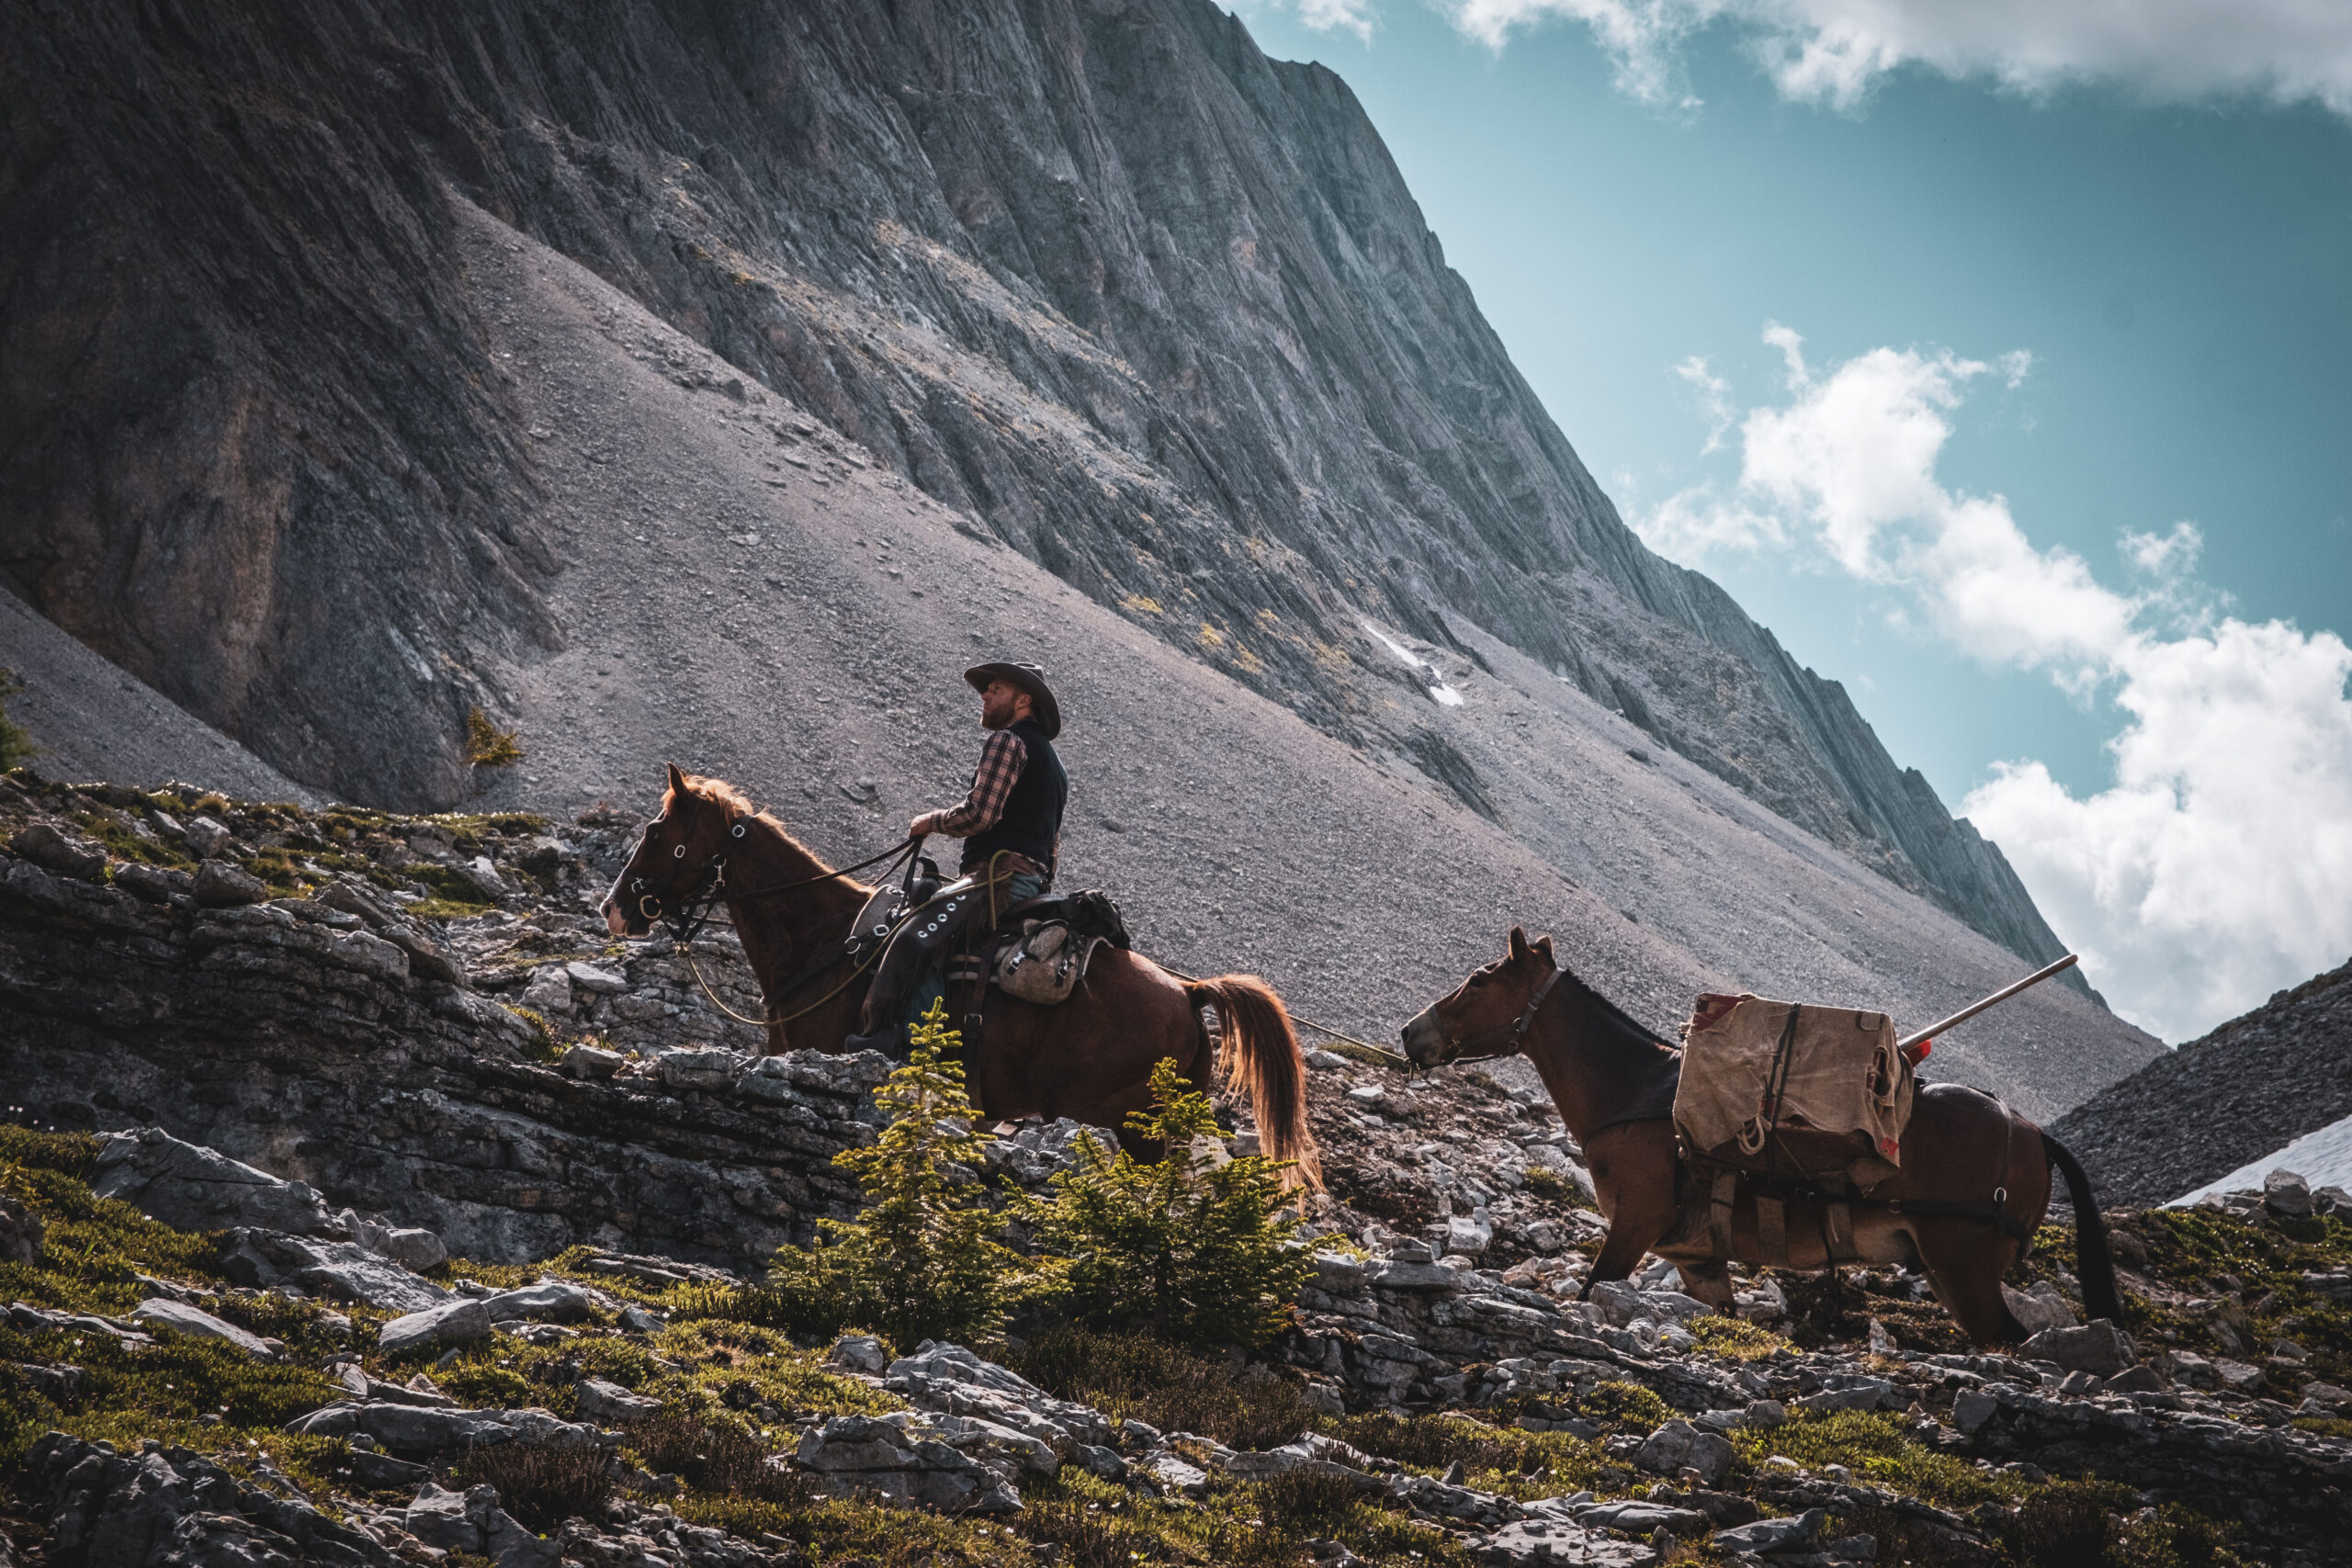 Lead Rider On Horseback With Pack Mule Heads Up Allenby Pass